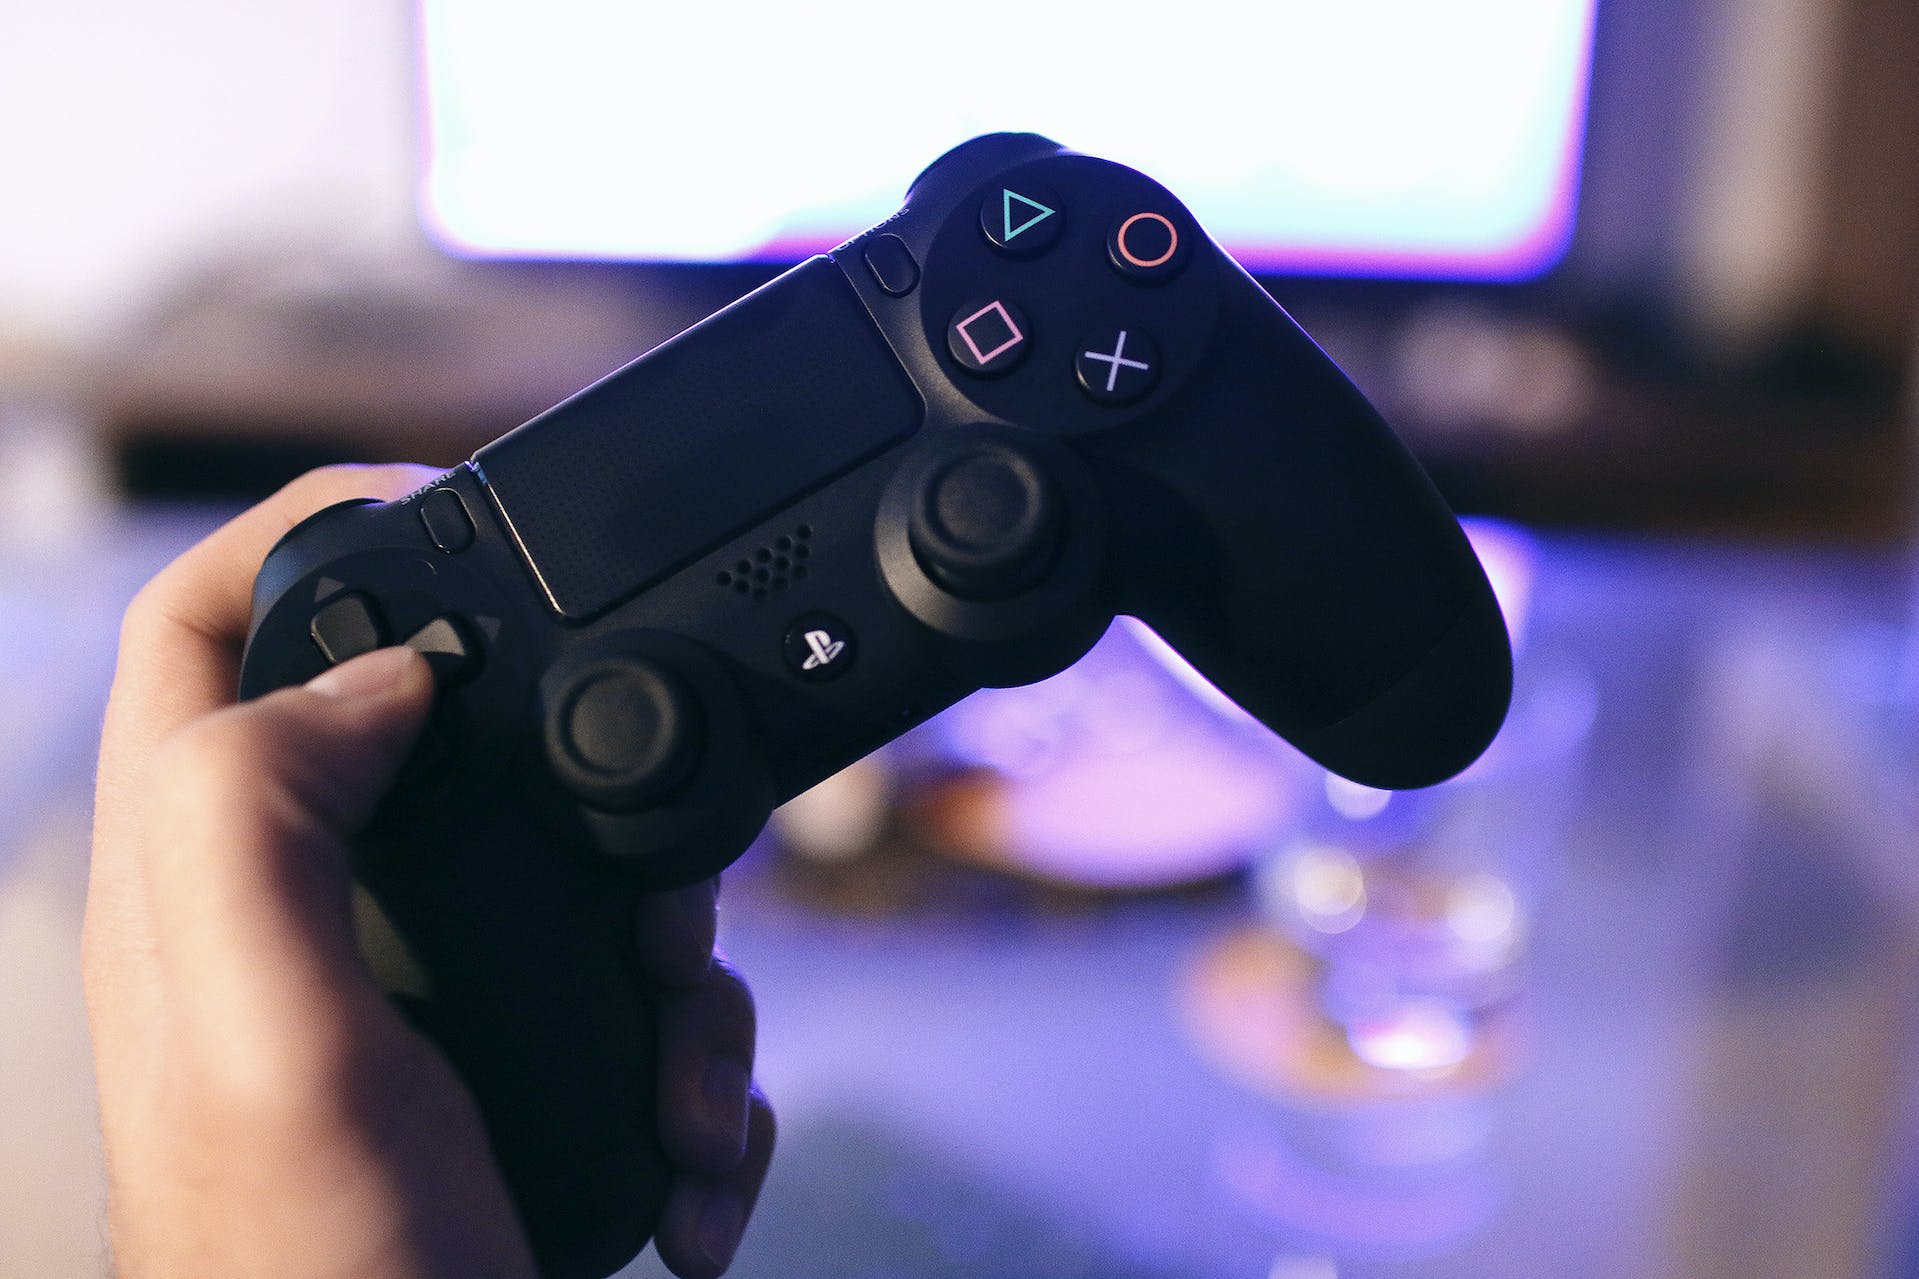 Person holding Playstation 4 | Source: Pexels